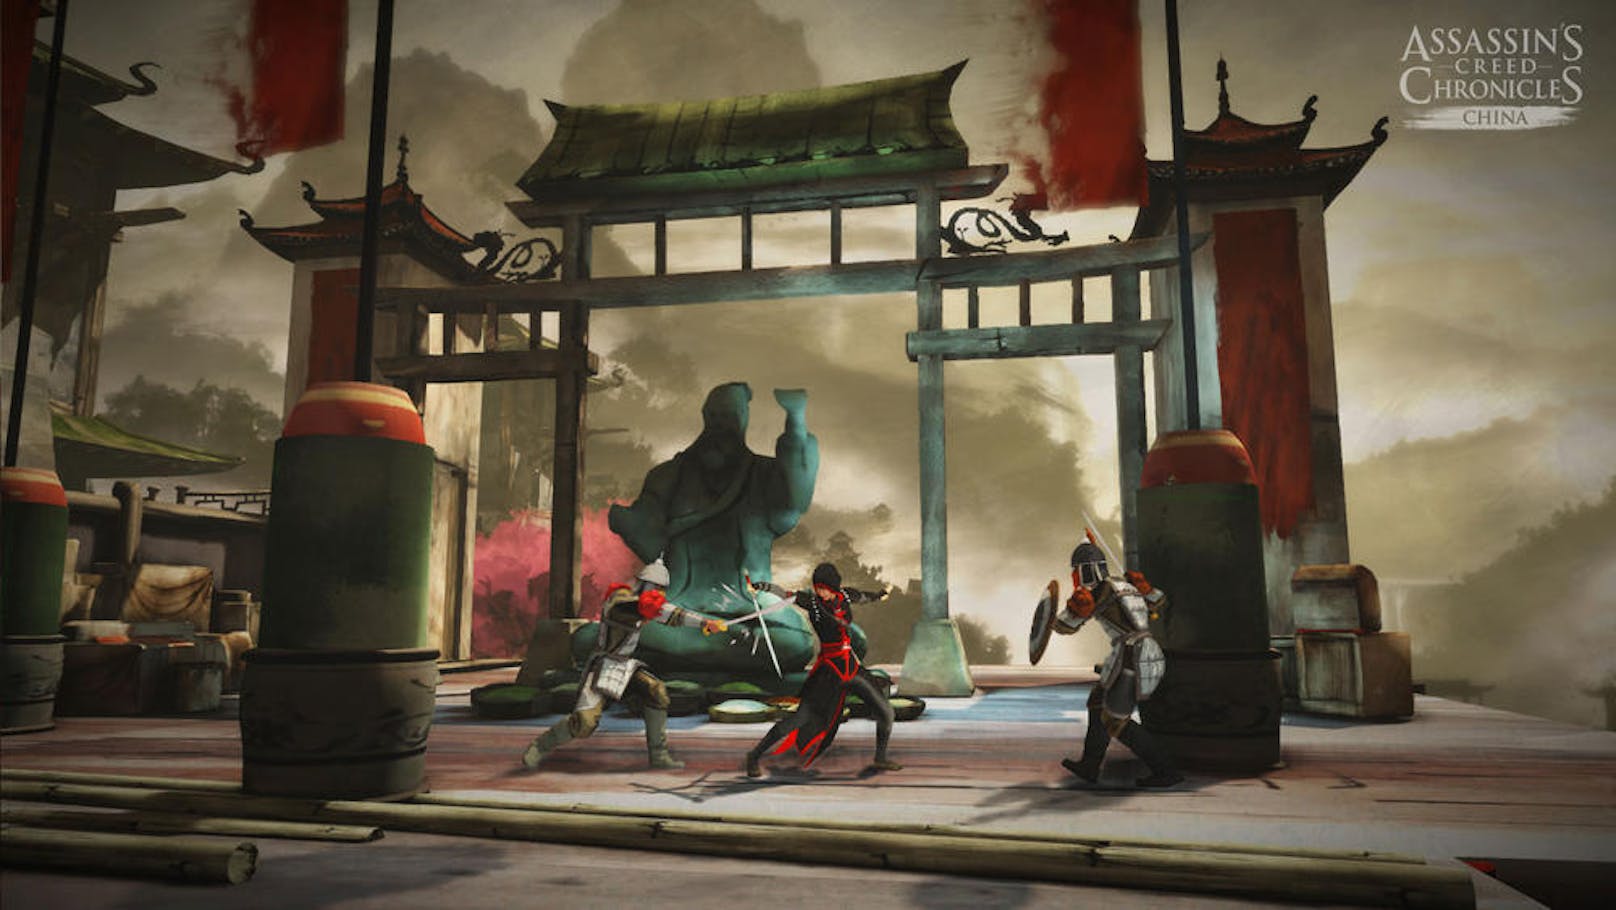  <a href="https://www.heute.at/digital/games/story/Assassin-s-Creed-Chronicles--China-im-Test-40133788" target="_blank">Assassin's Creed Chronicles: China</a>